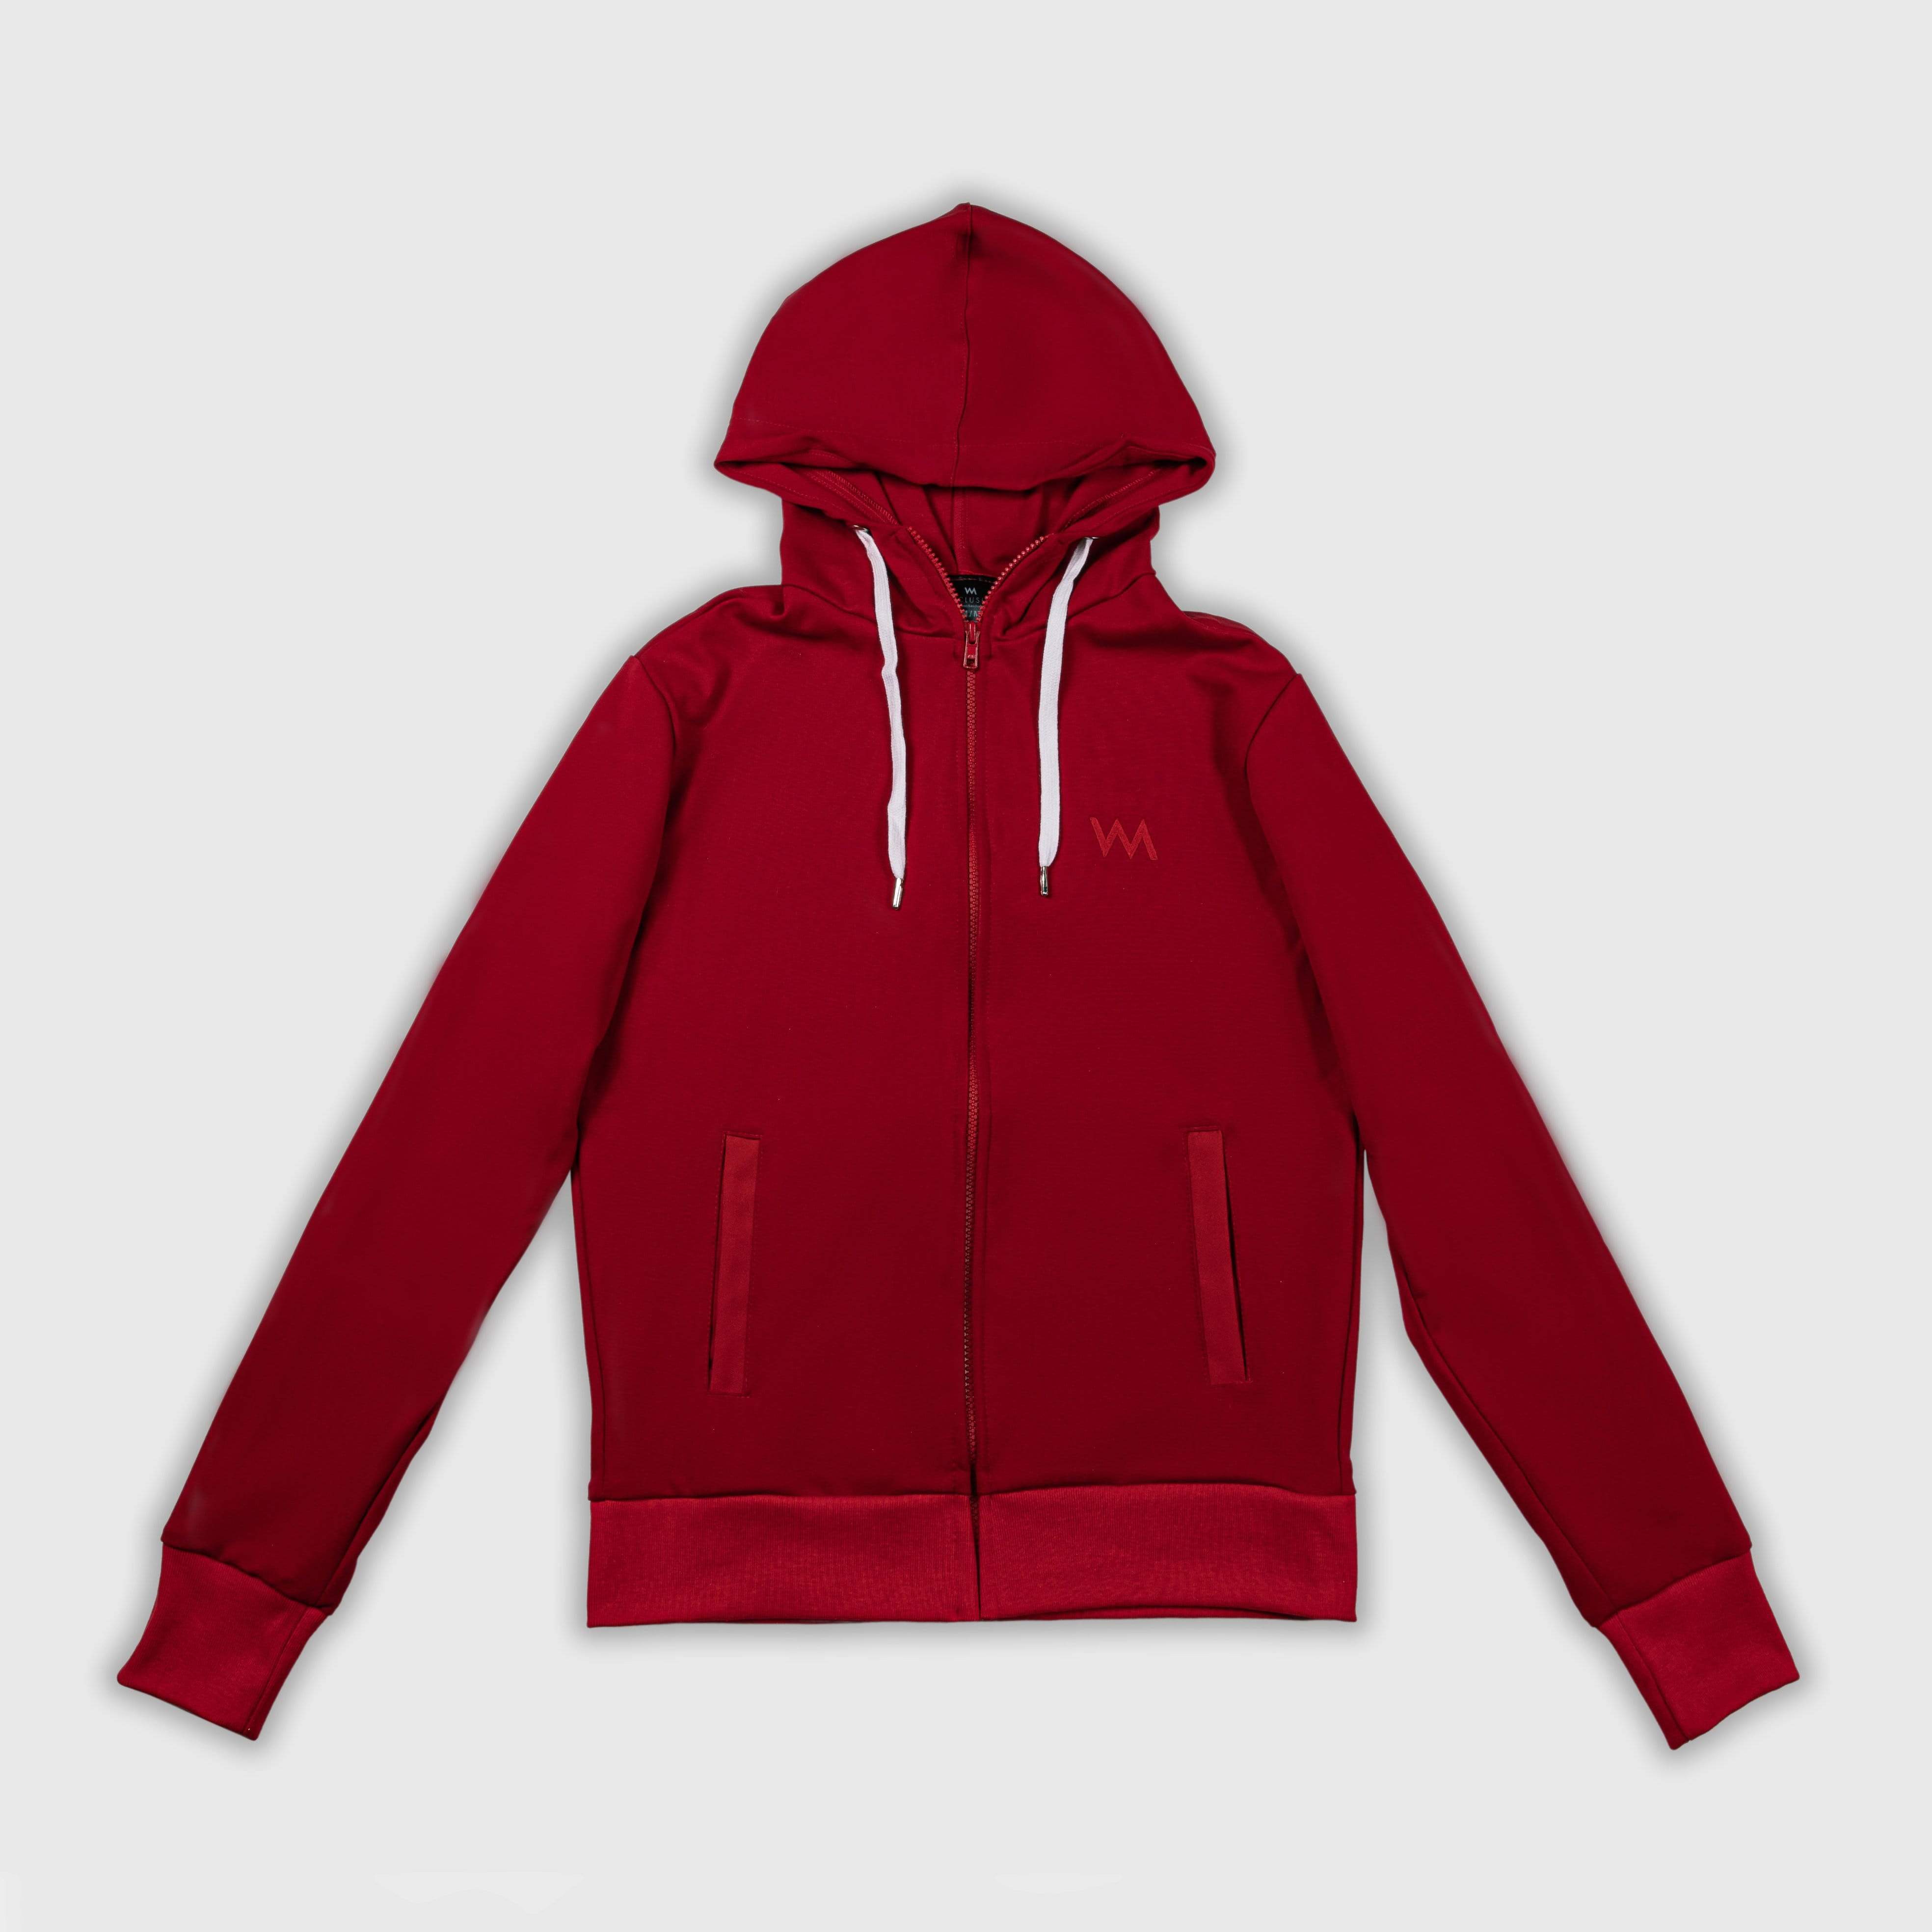 HOODED JACKET - RED